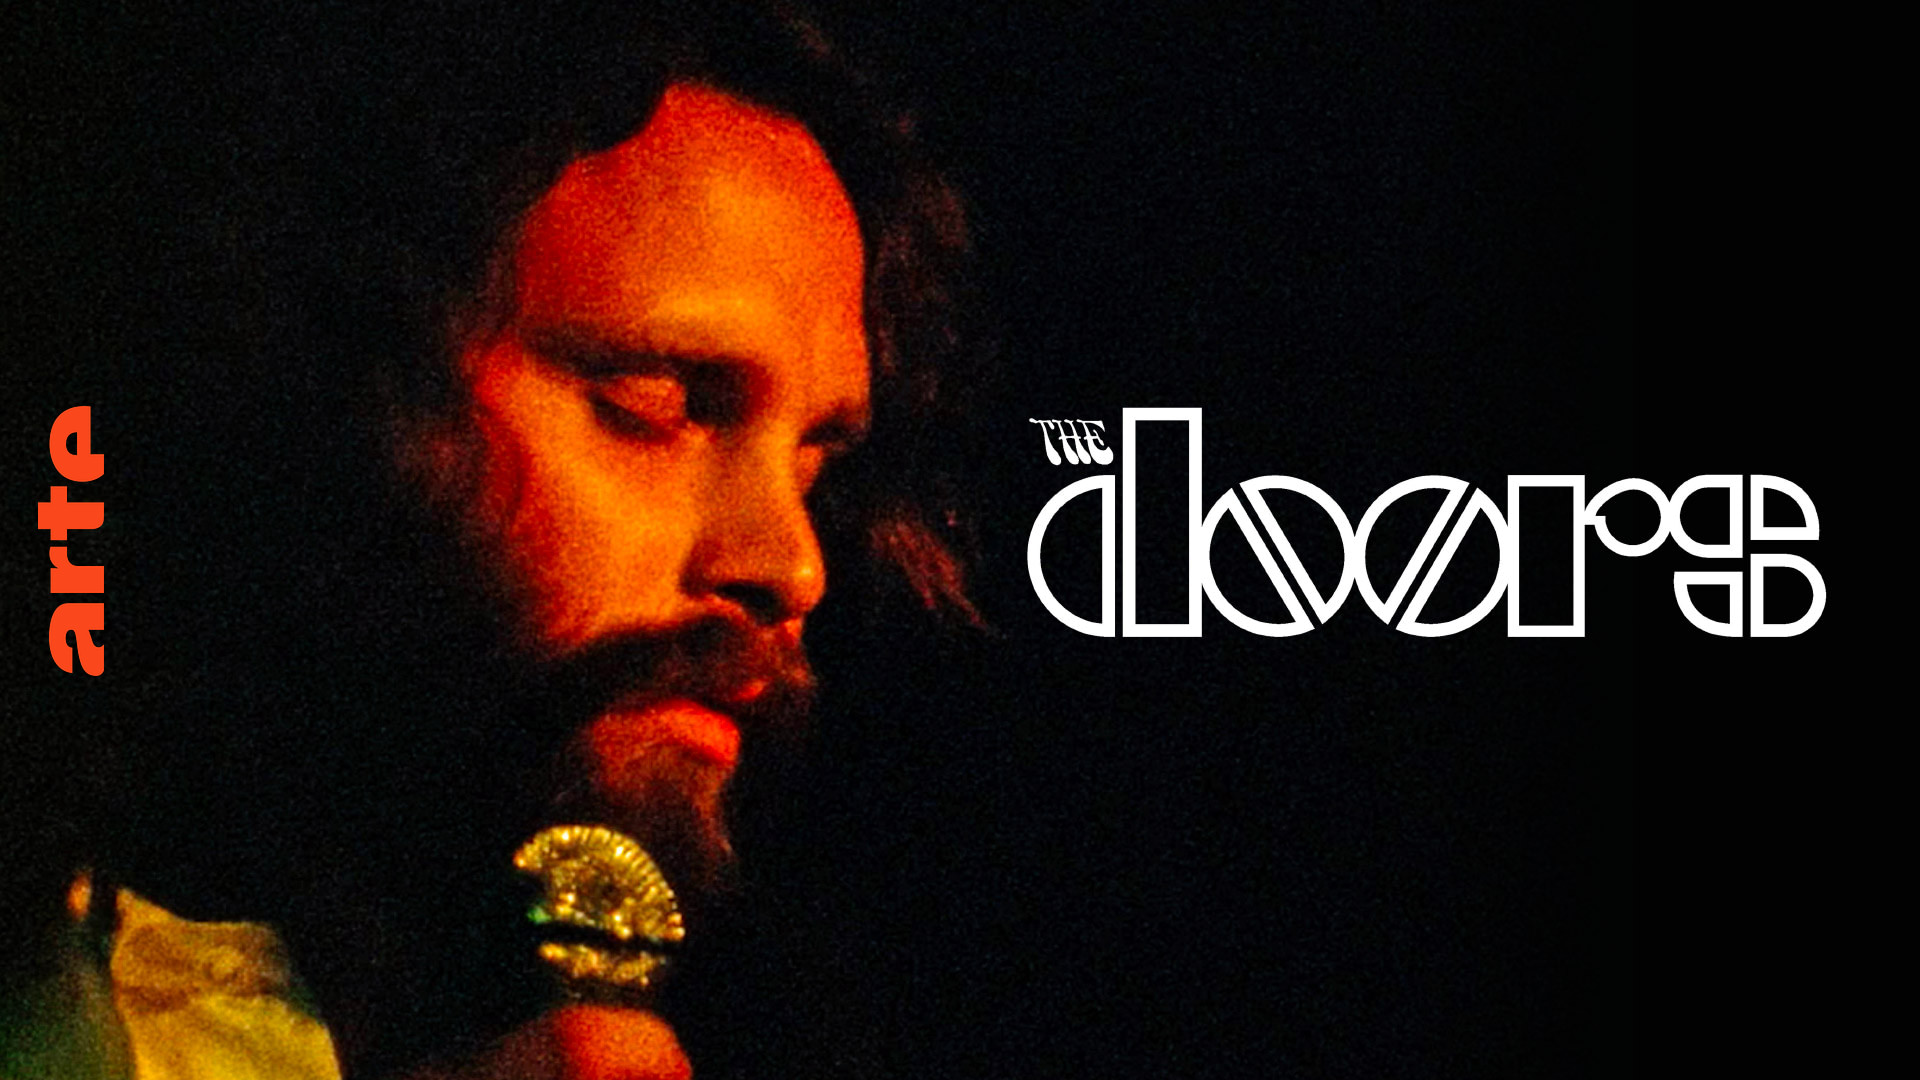 The Doors - Live at the Isle of Wight Festival 1970